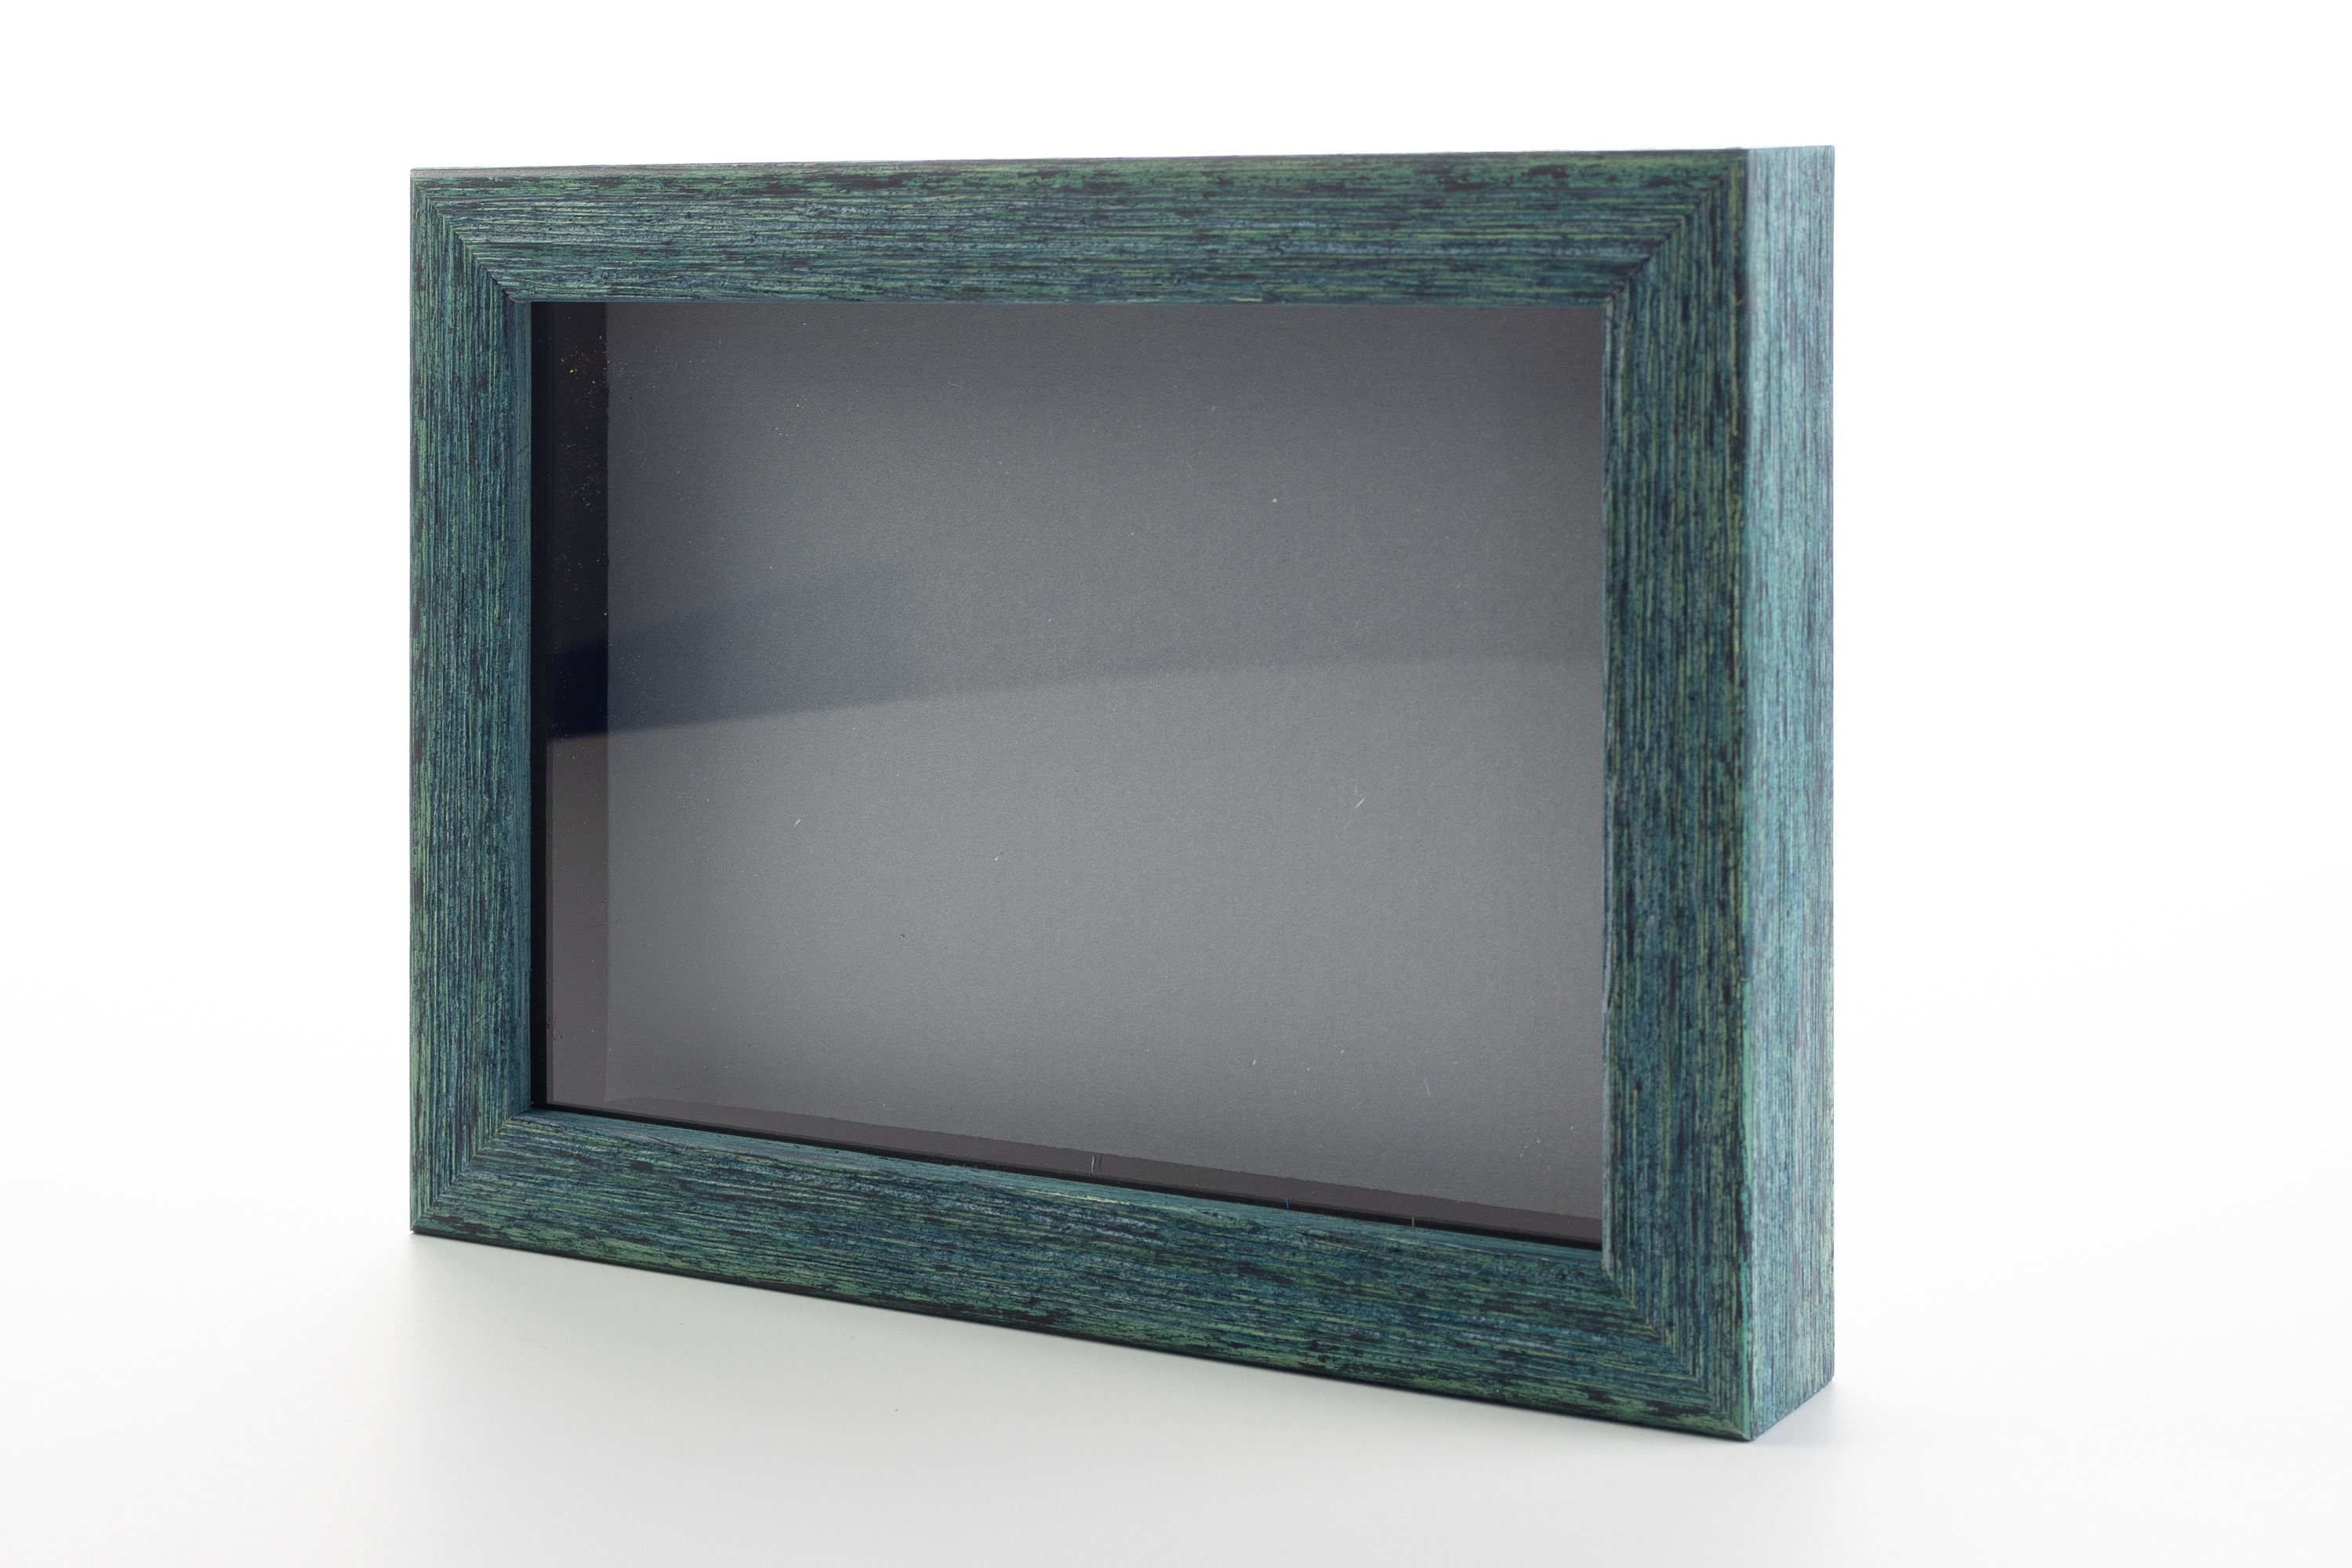 CustomPictureFrames 10x20 Classic Brown Wood Picture Frame - with Acrylic Front and Foam Board Backing